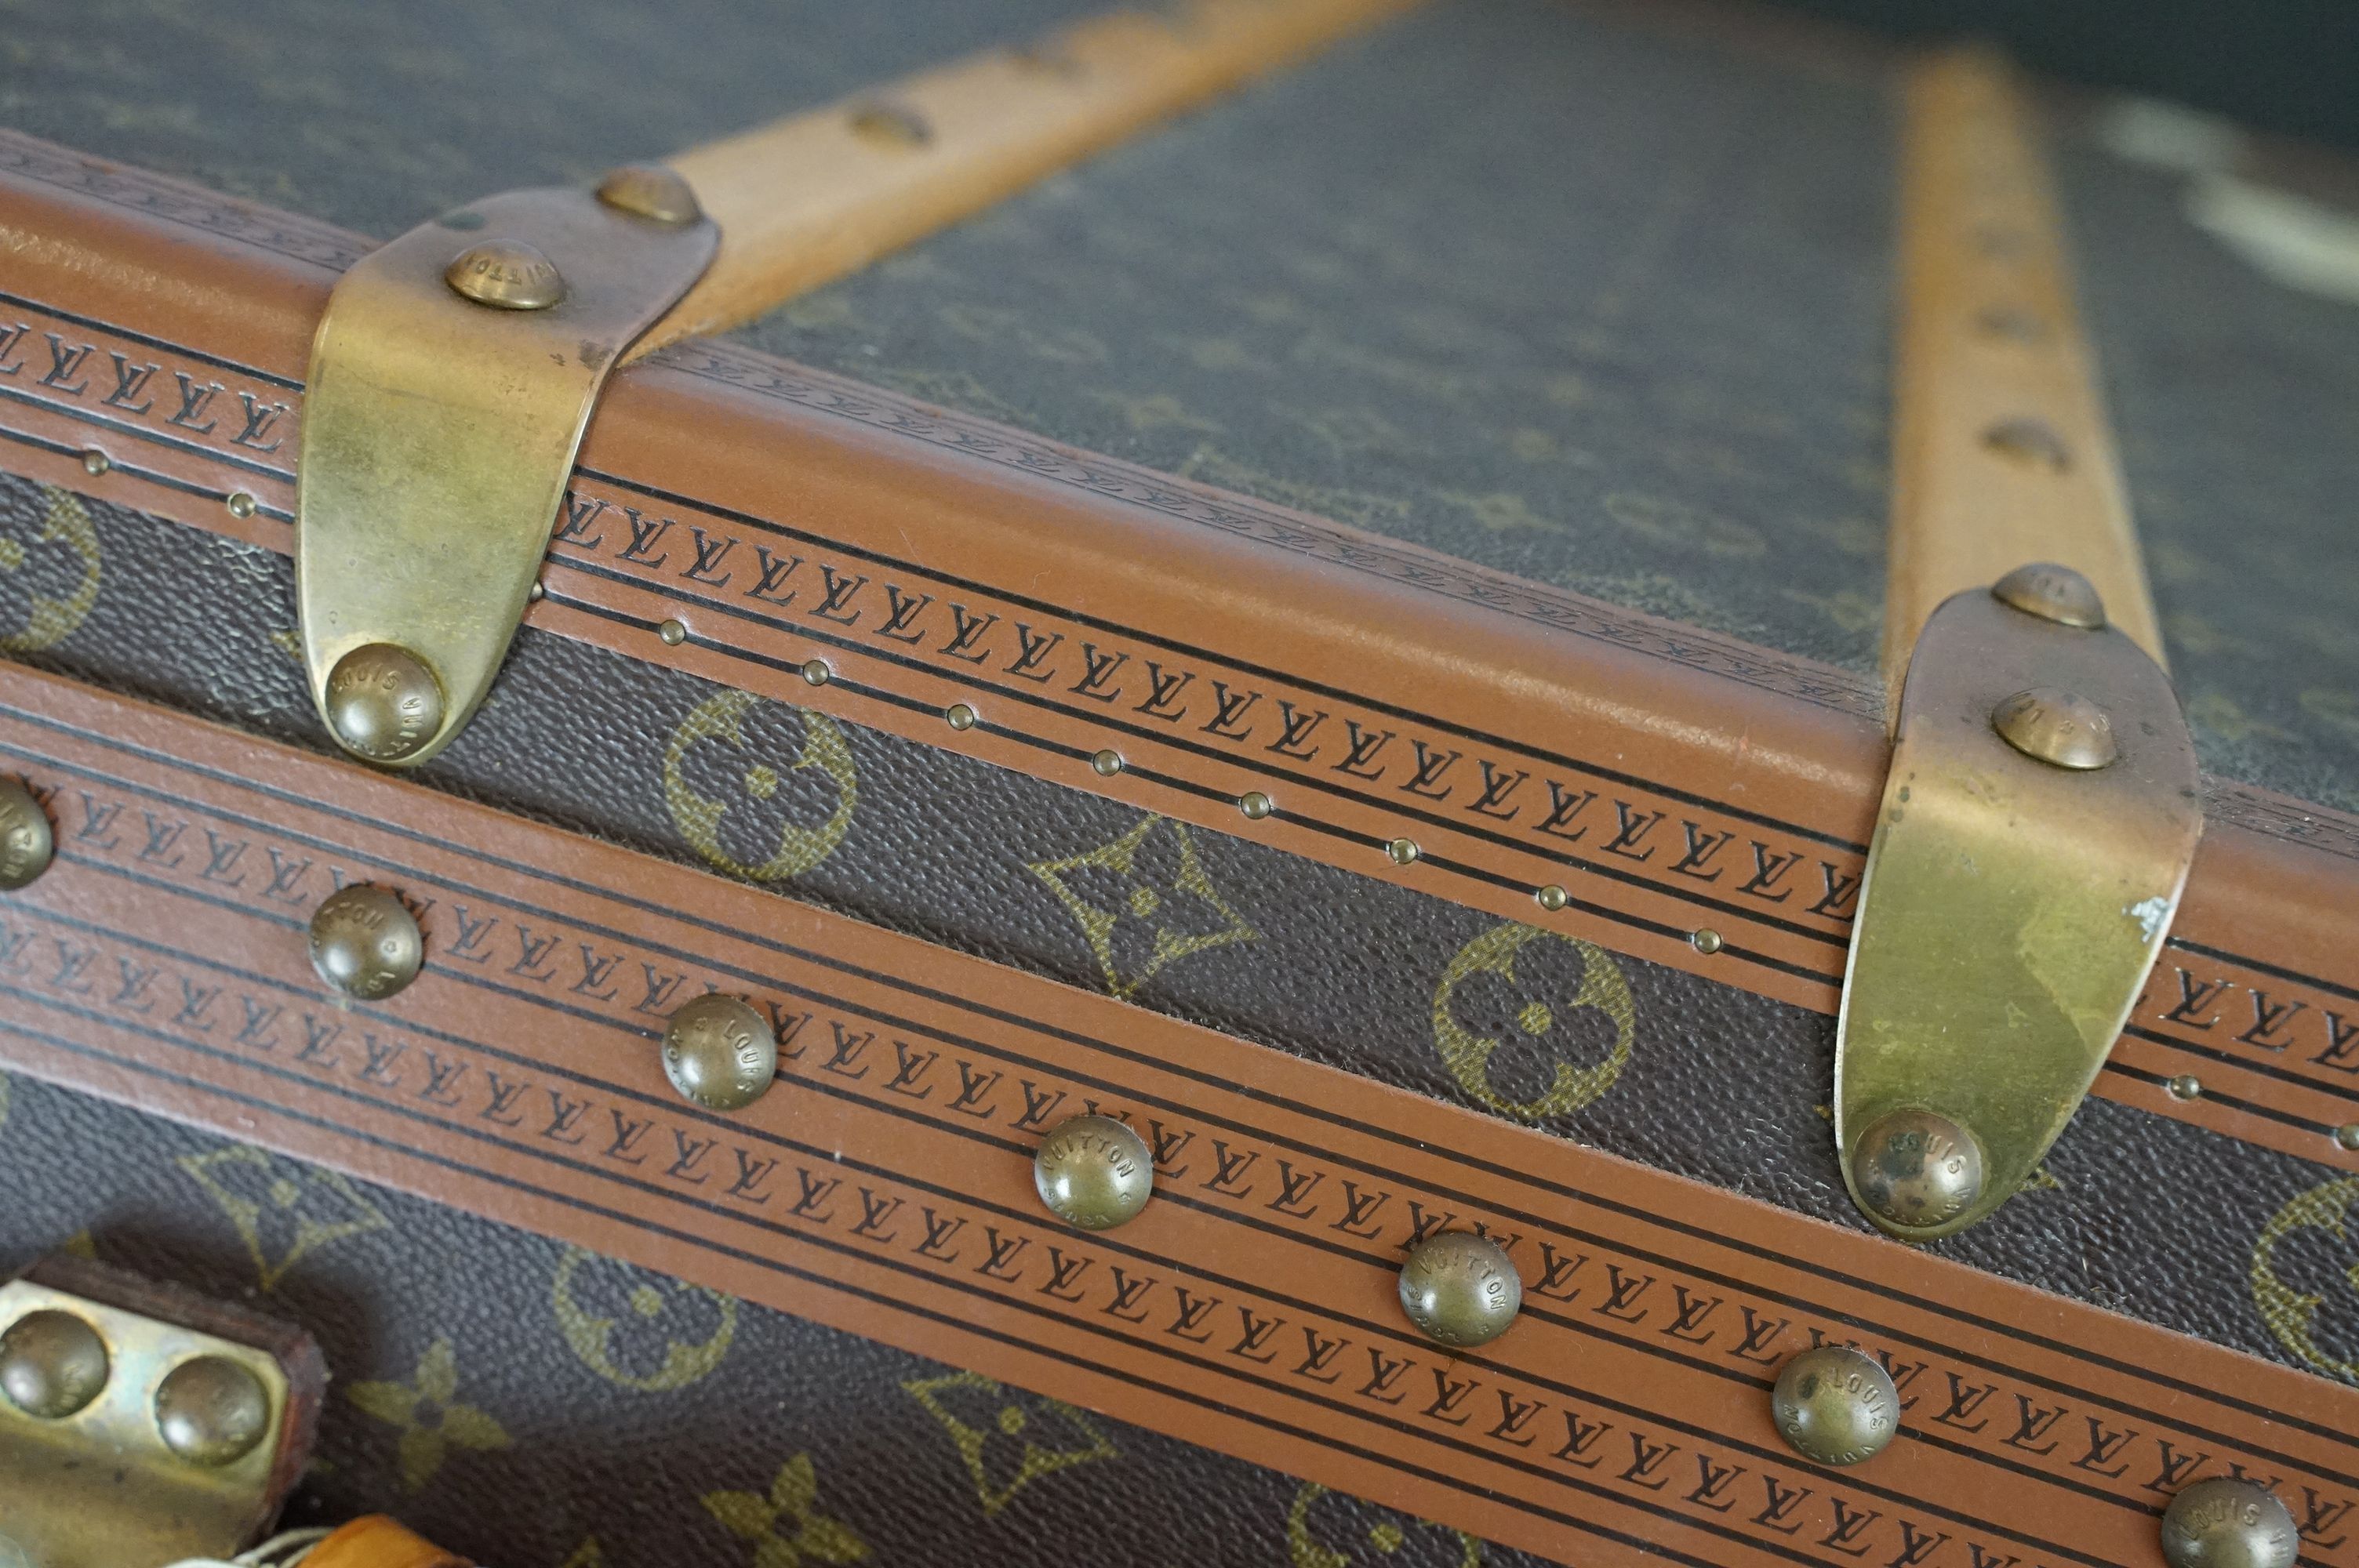 Louis Vuitton - Monogrammed canvas travel trunk having branded leather banding, wooden slats, - Image 26 of 32